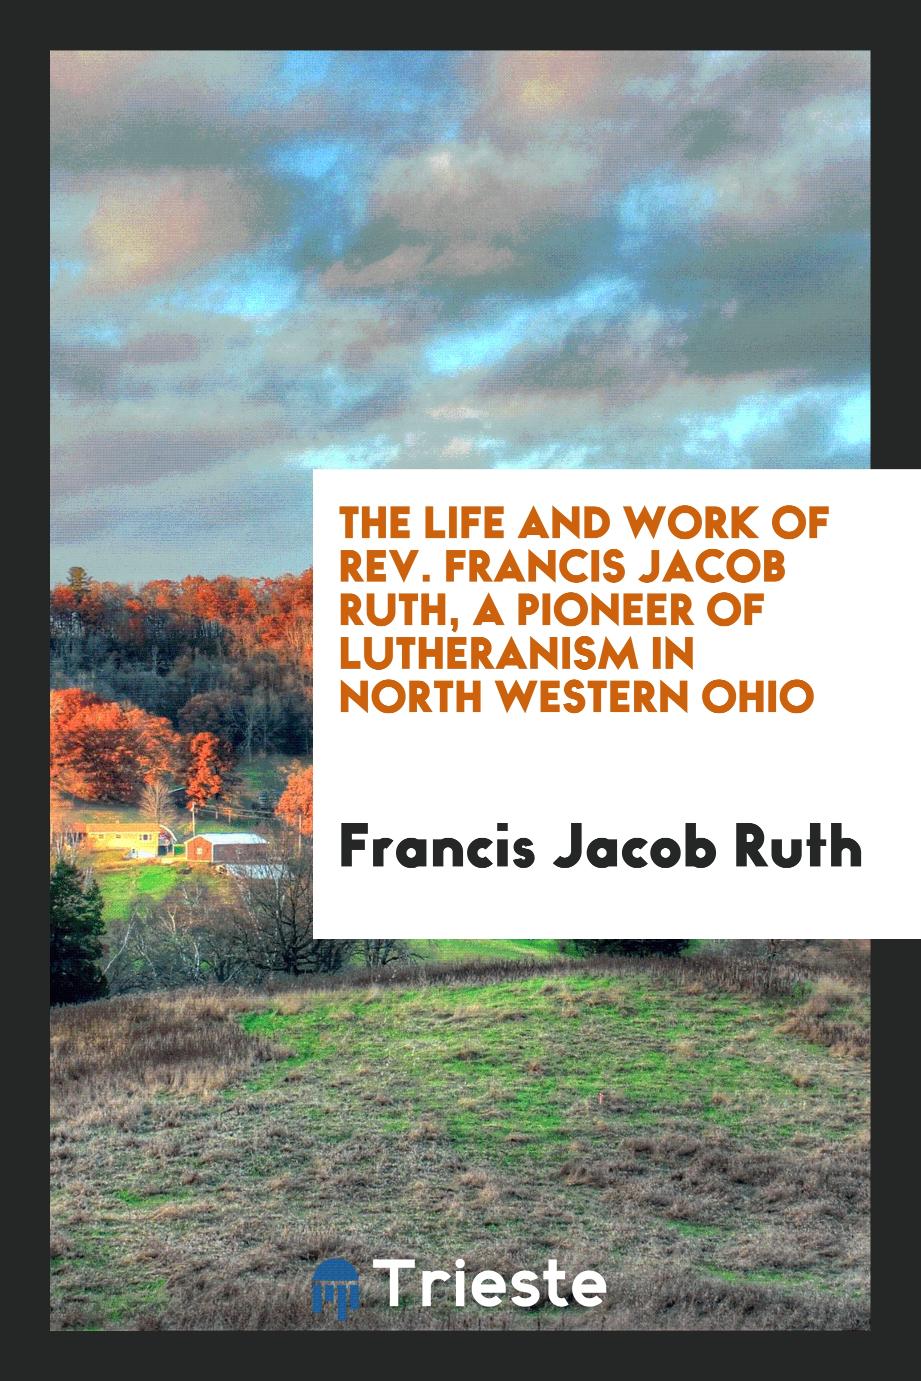 The Life and Work of Rev. Francis Jacob Ruth, a Pioneer of Lutheranism in North Western Ohio